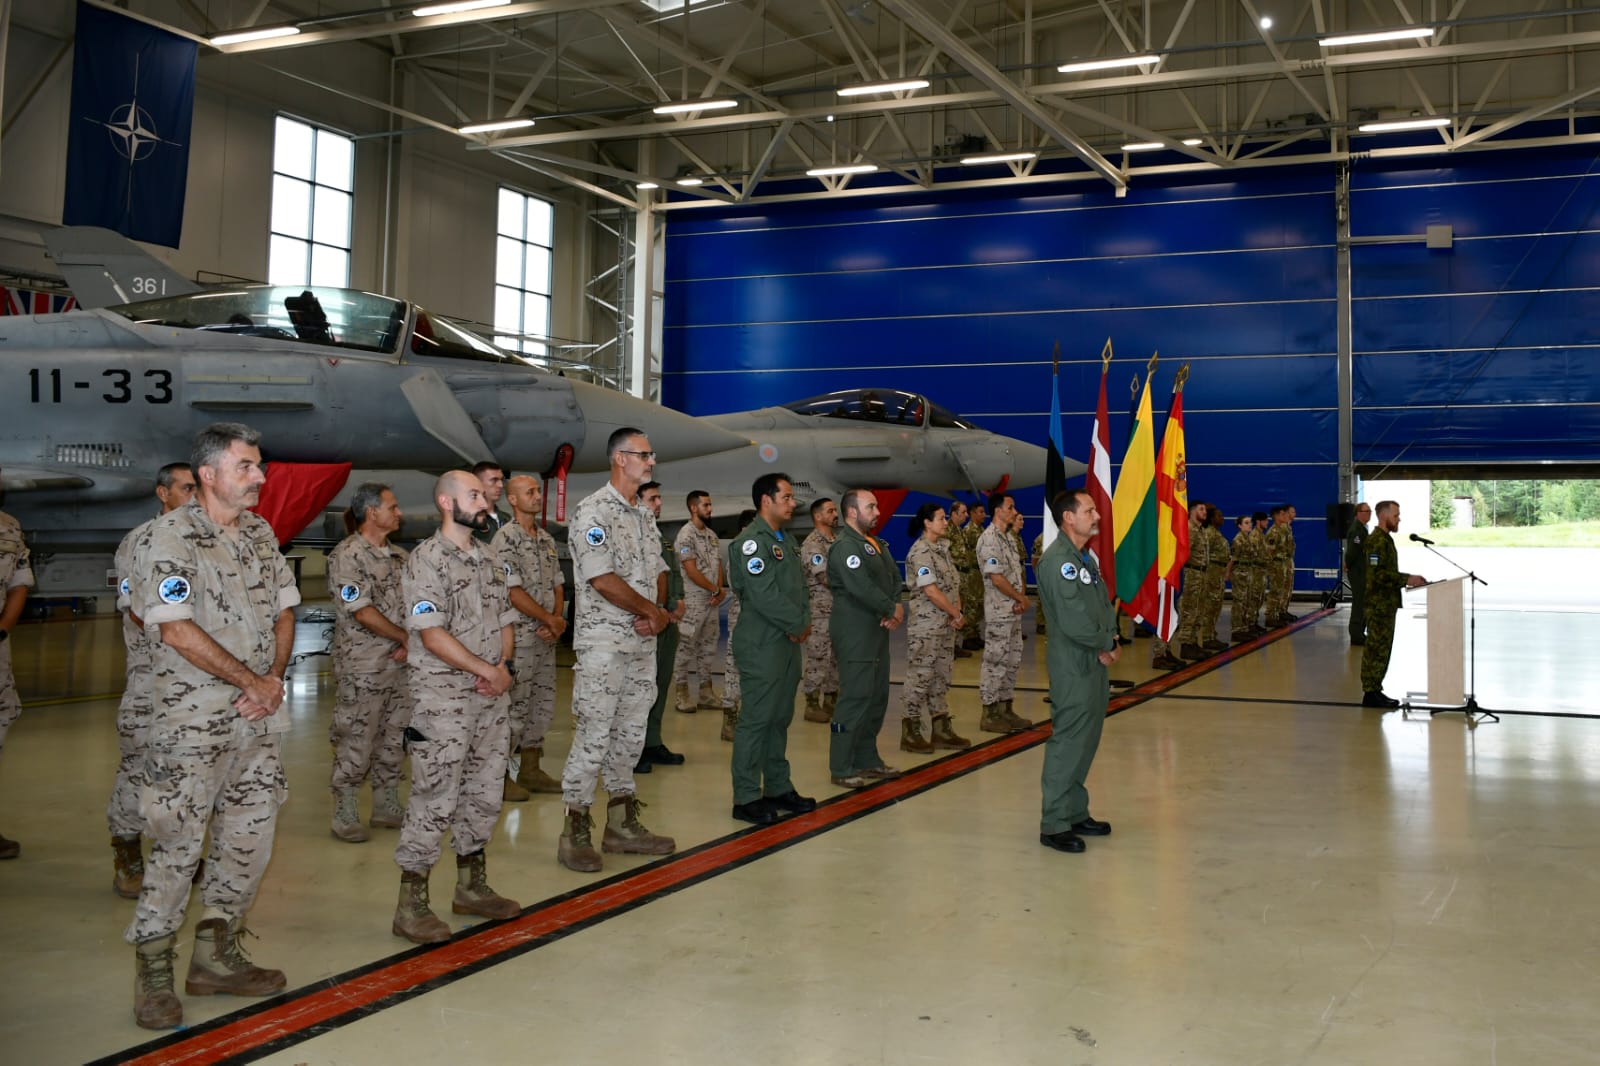 Spanish and British military personnel during the ceremony